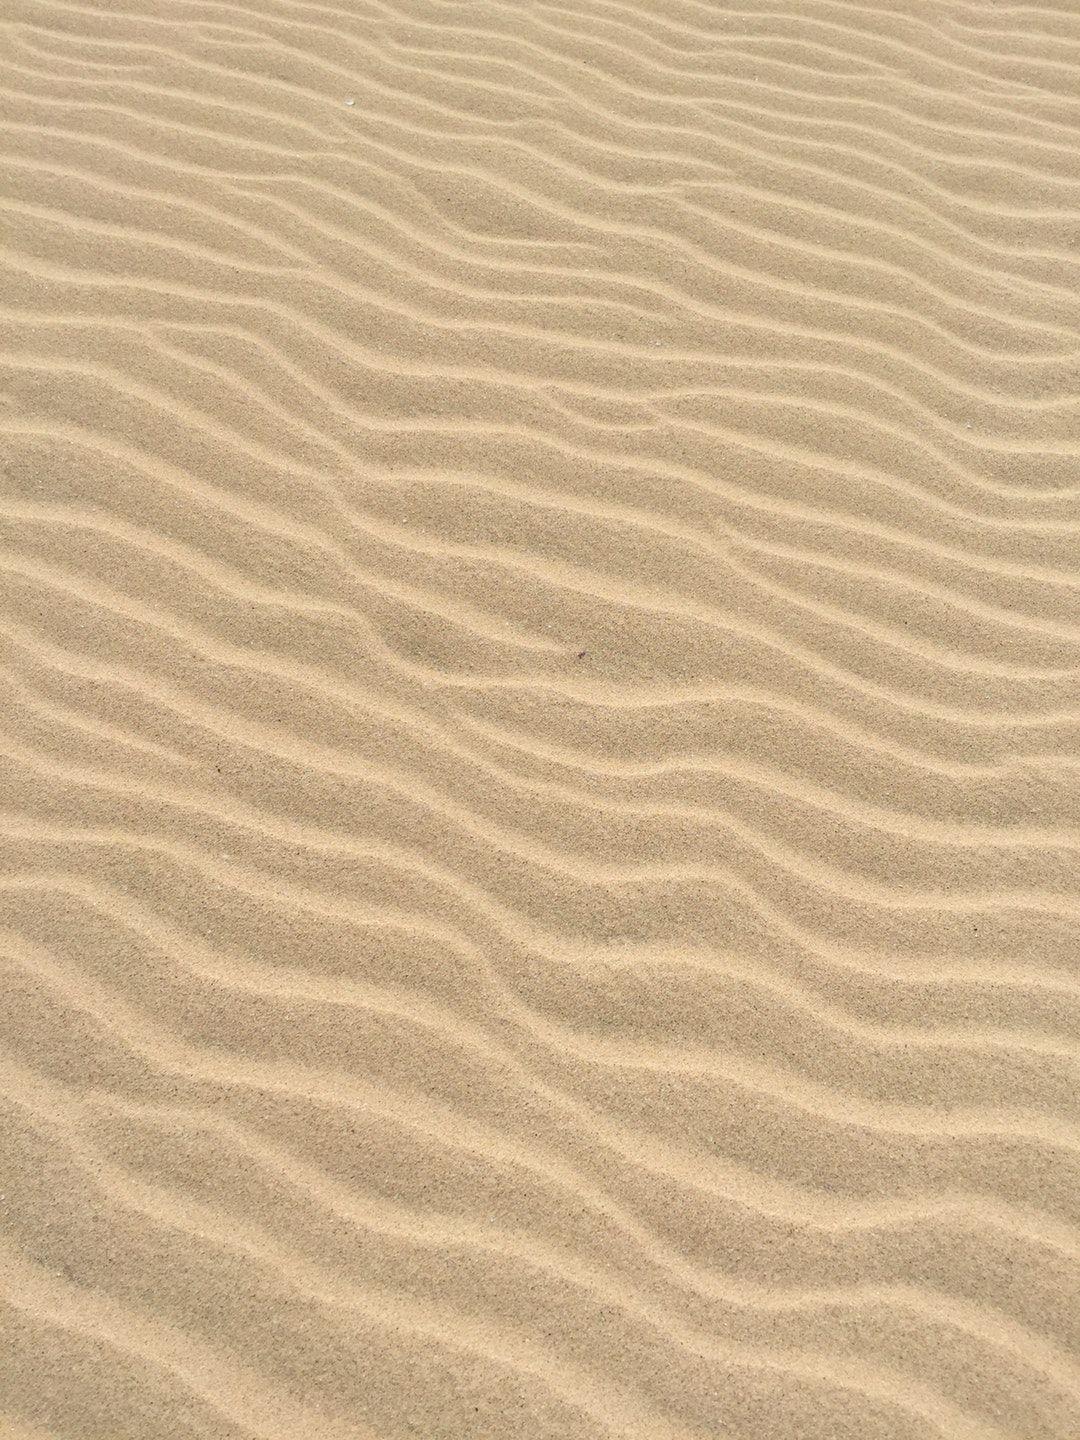 Sand Picture [HD]. Download Free Image